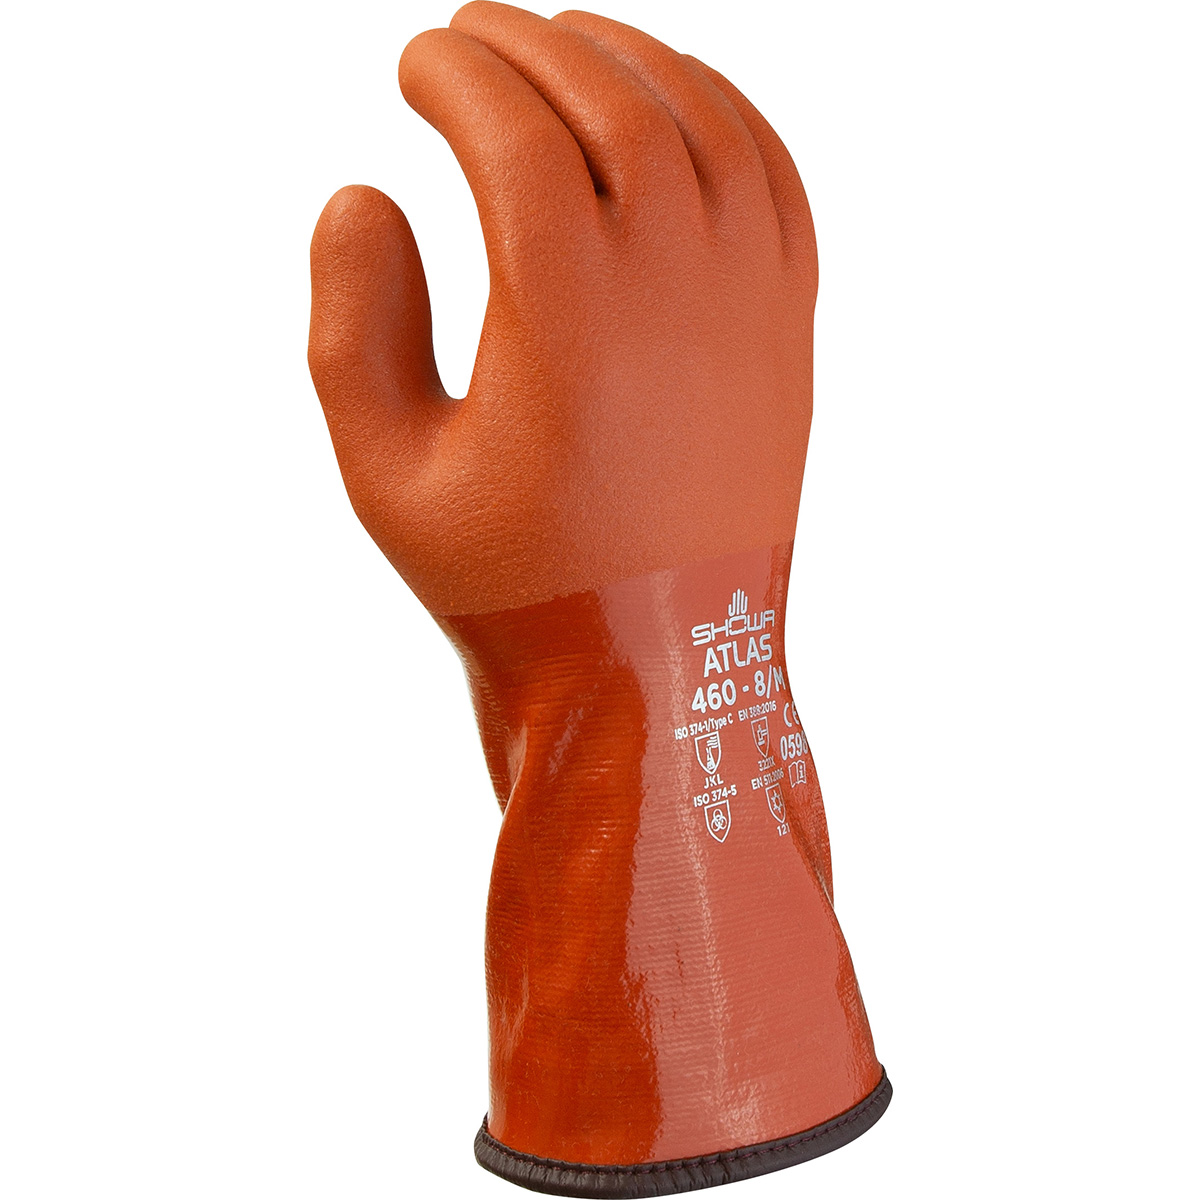 Chemical resistant PVC fully coated double dipped, insulated with seamless acrylic liner, orange, rough finish, small